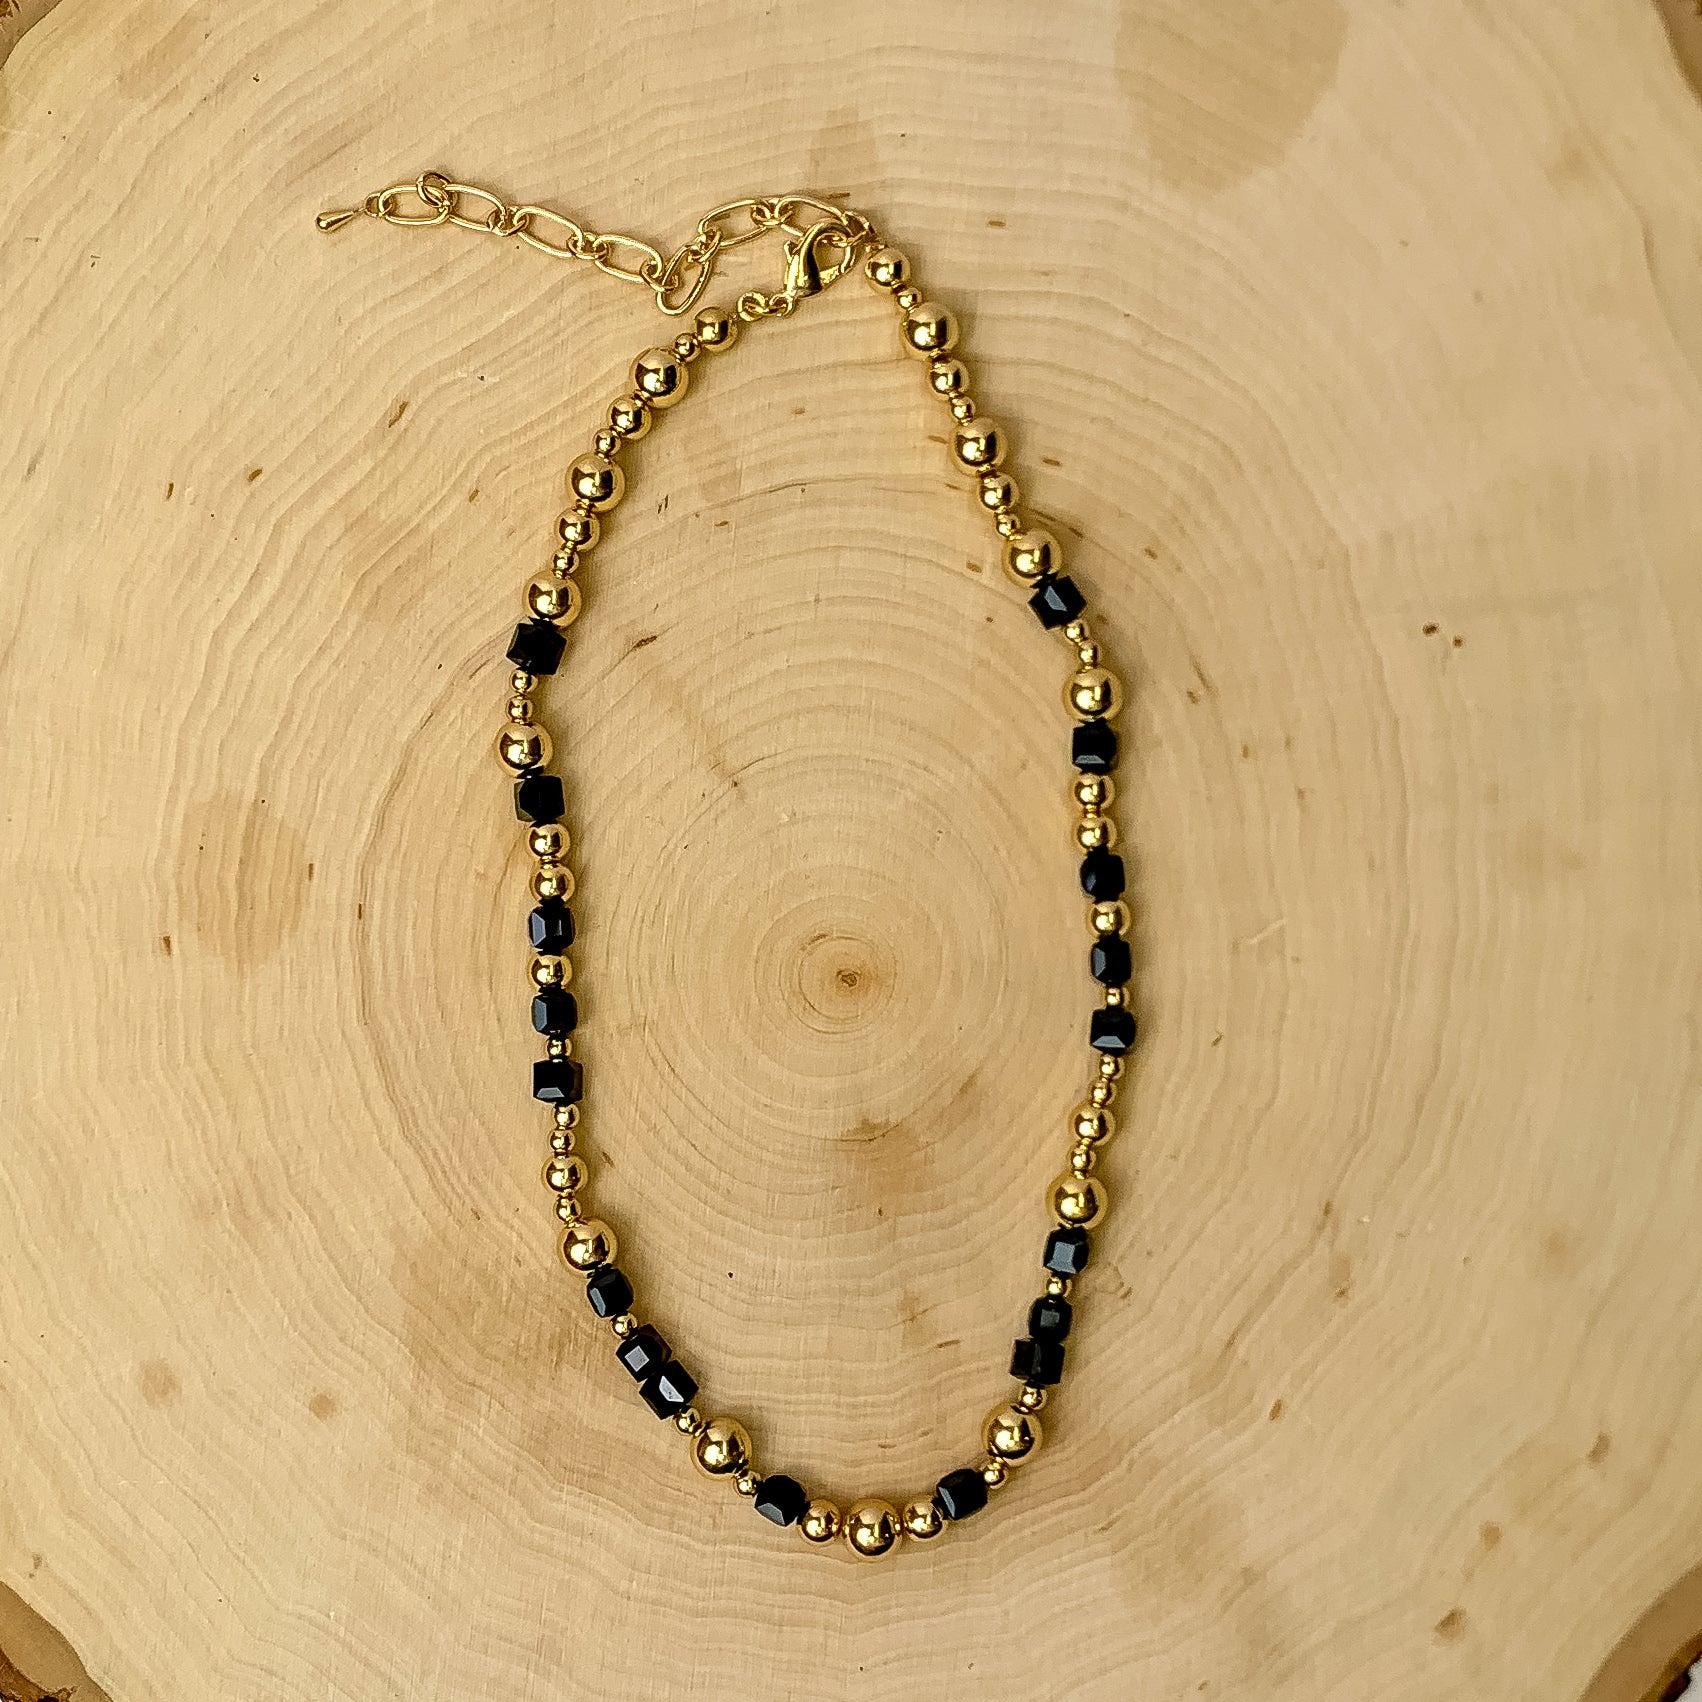 This necklace has gold tone and black beads. It is placed against a wooden background.